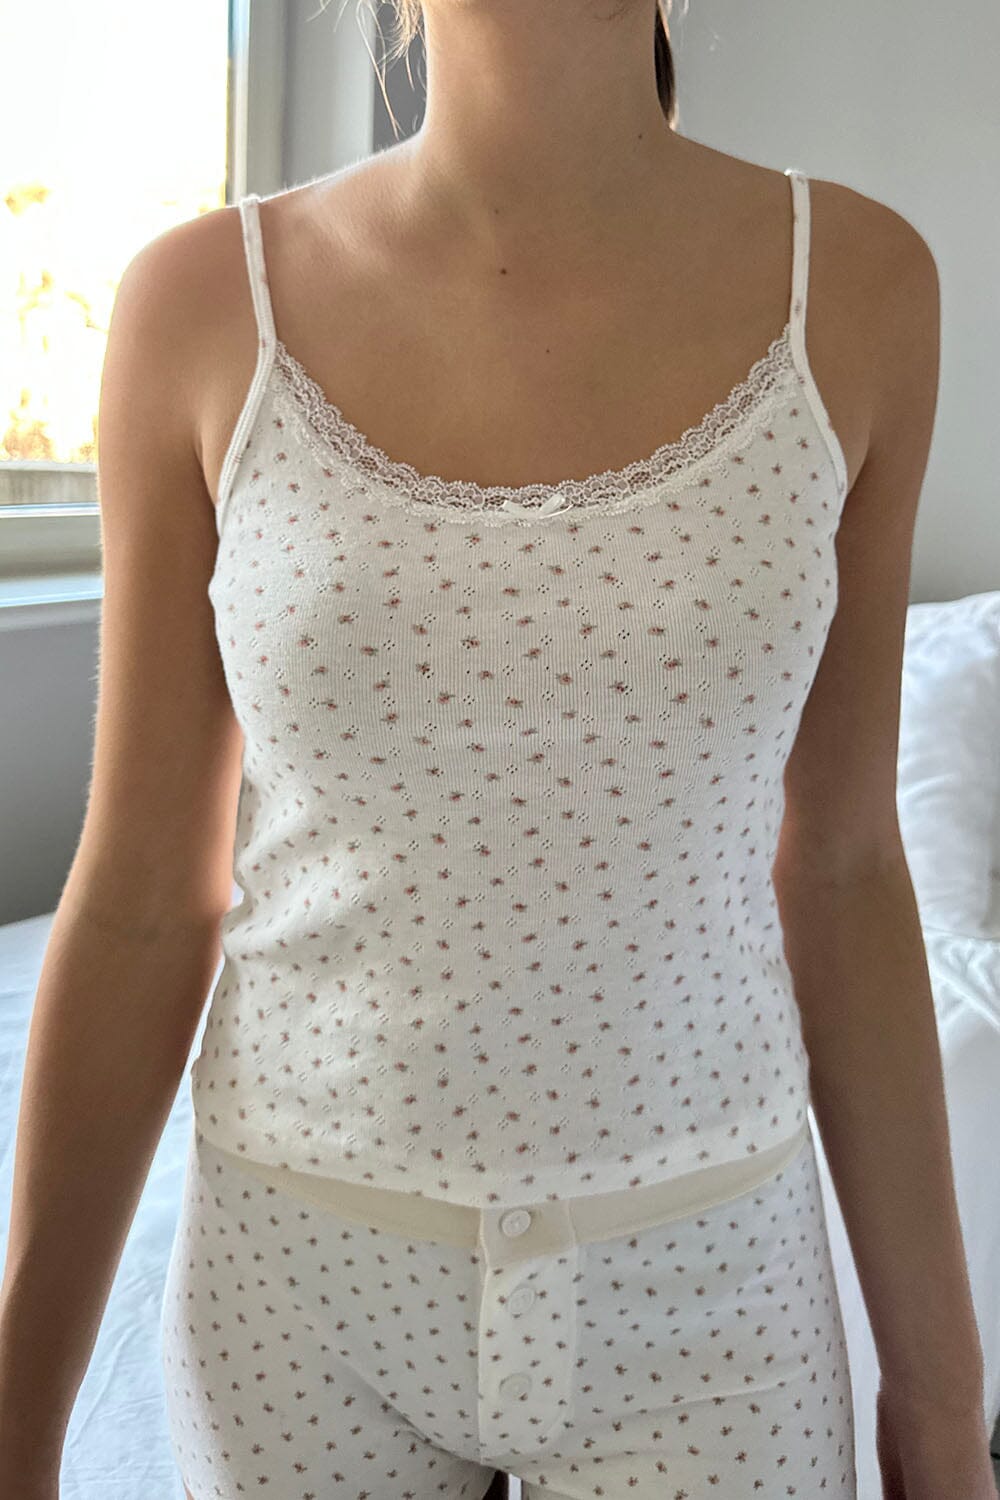 BNWPT BRANDY MELVILLE FLORAL EYELET BUTTON UP ZELLY TOP AUTHENTIC